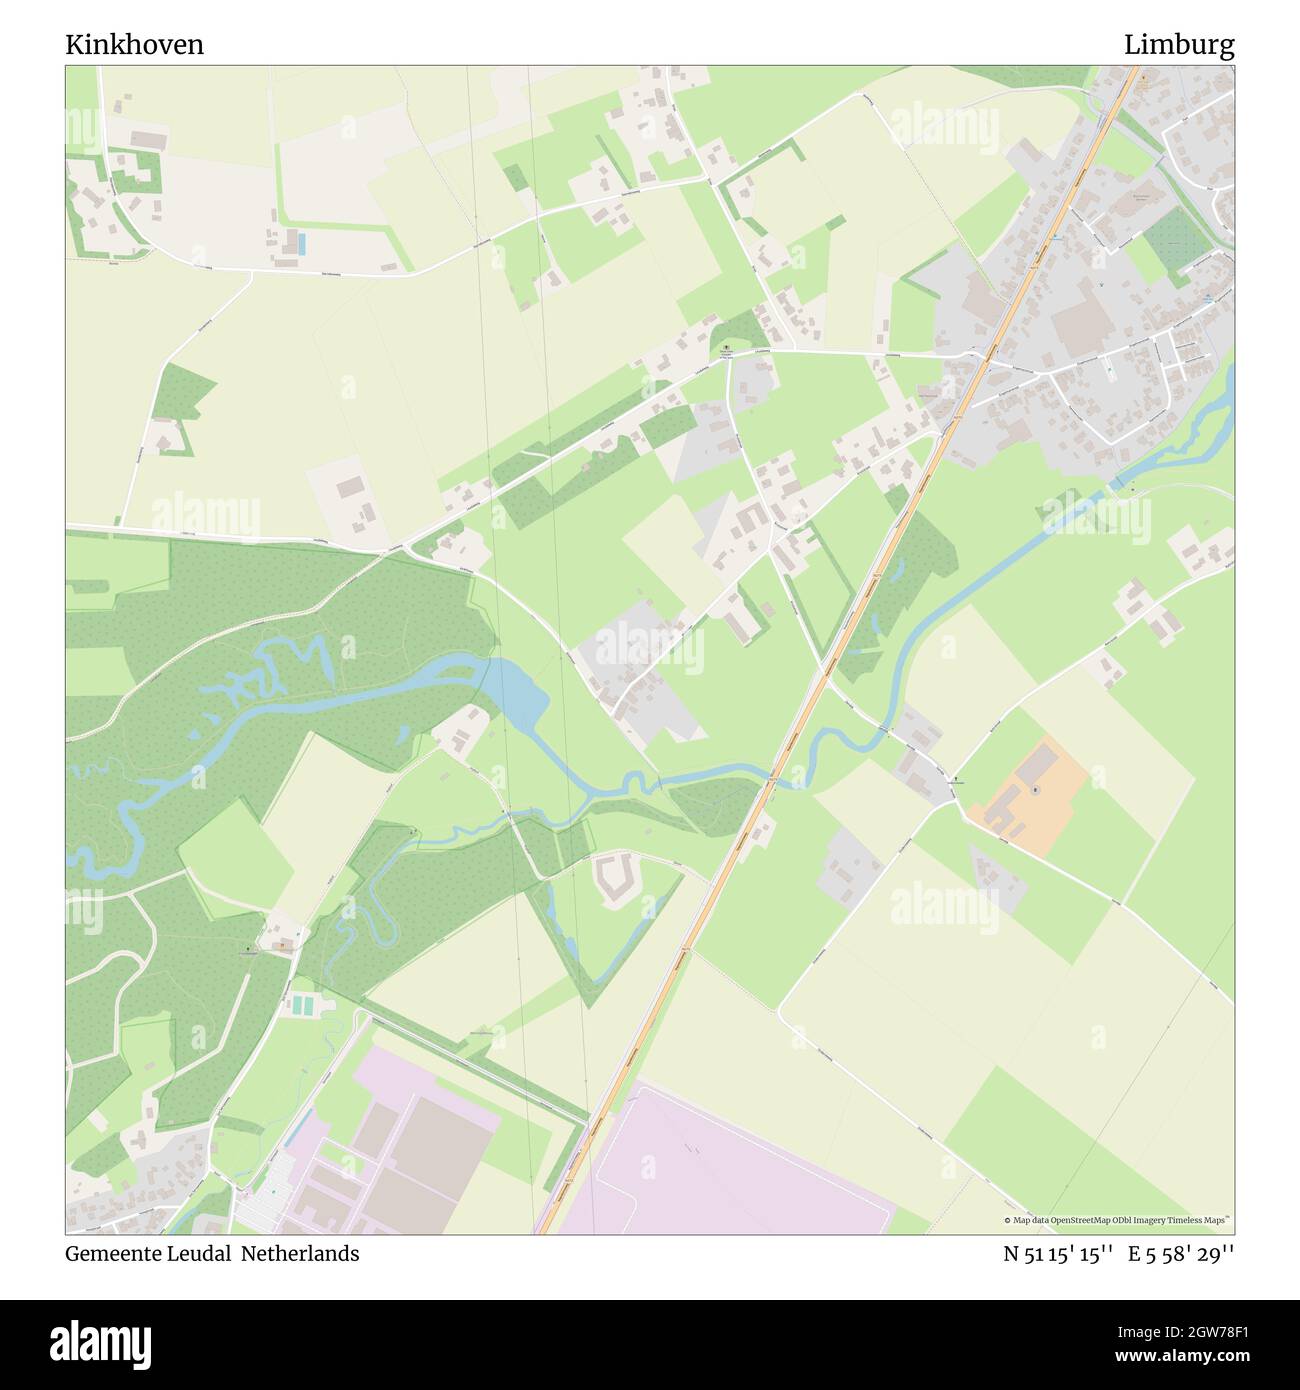 Kinkhoven, Gemeente Leudal, Netherlands, Limburg, N 51 15' 15'', E 5 58' 29'', map, Timeless Map published in 2021. Travelers, explorers and adventurers like Florence Nightingale, David Livingstone, Ernest Shackleton, Lewis and Clark and Sherlock Holmes relied on maps to plan travels to the world's most remote corners, Timeless Maps is mapping most locations on the globe, showing the achievement of great dreams Stock Photo